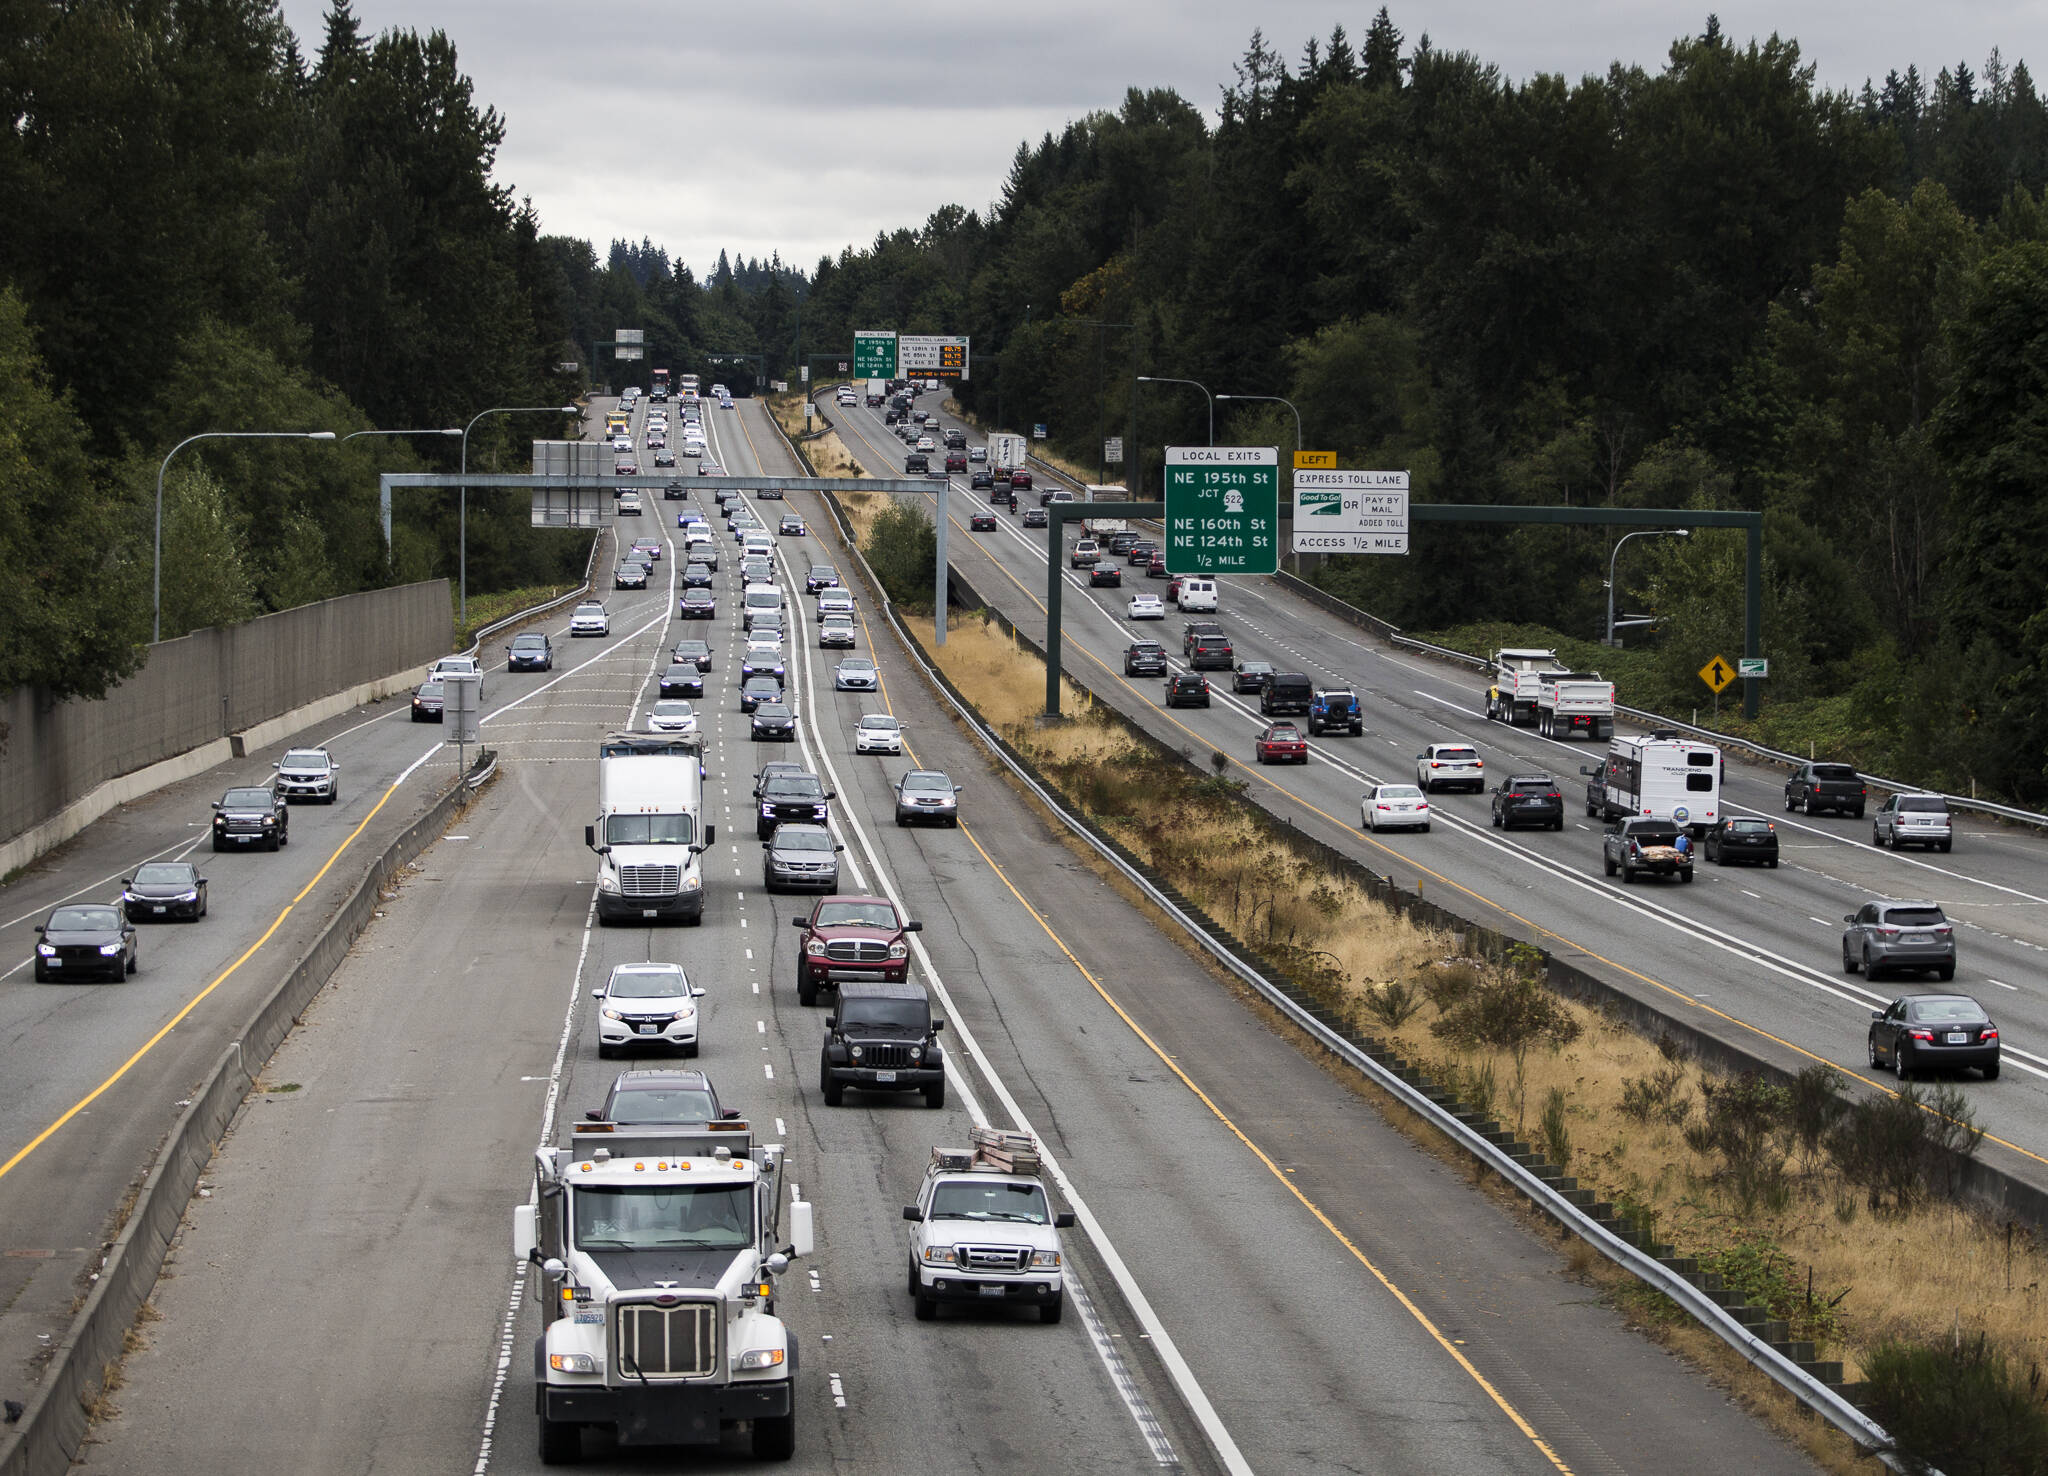 Traffic moves along I-405 between Highway 522 and Highway 527 on Friday, Aug. 20, 2021 in Bothell, Washington. (Olivia Vanni / The Herald)